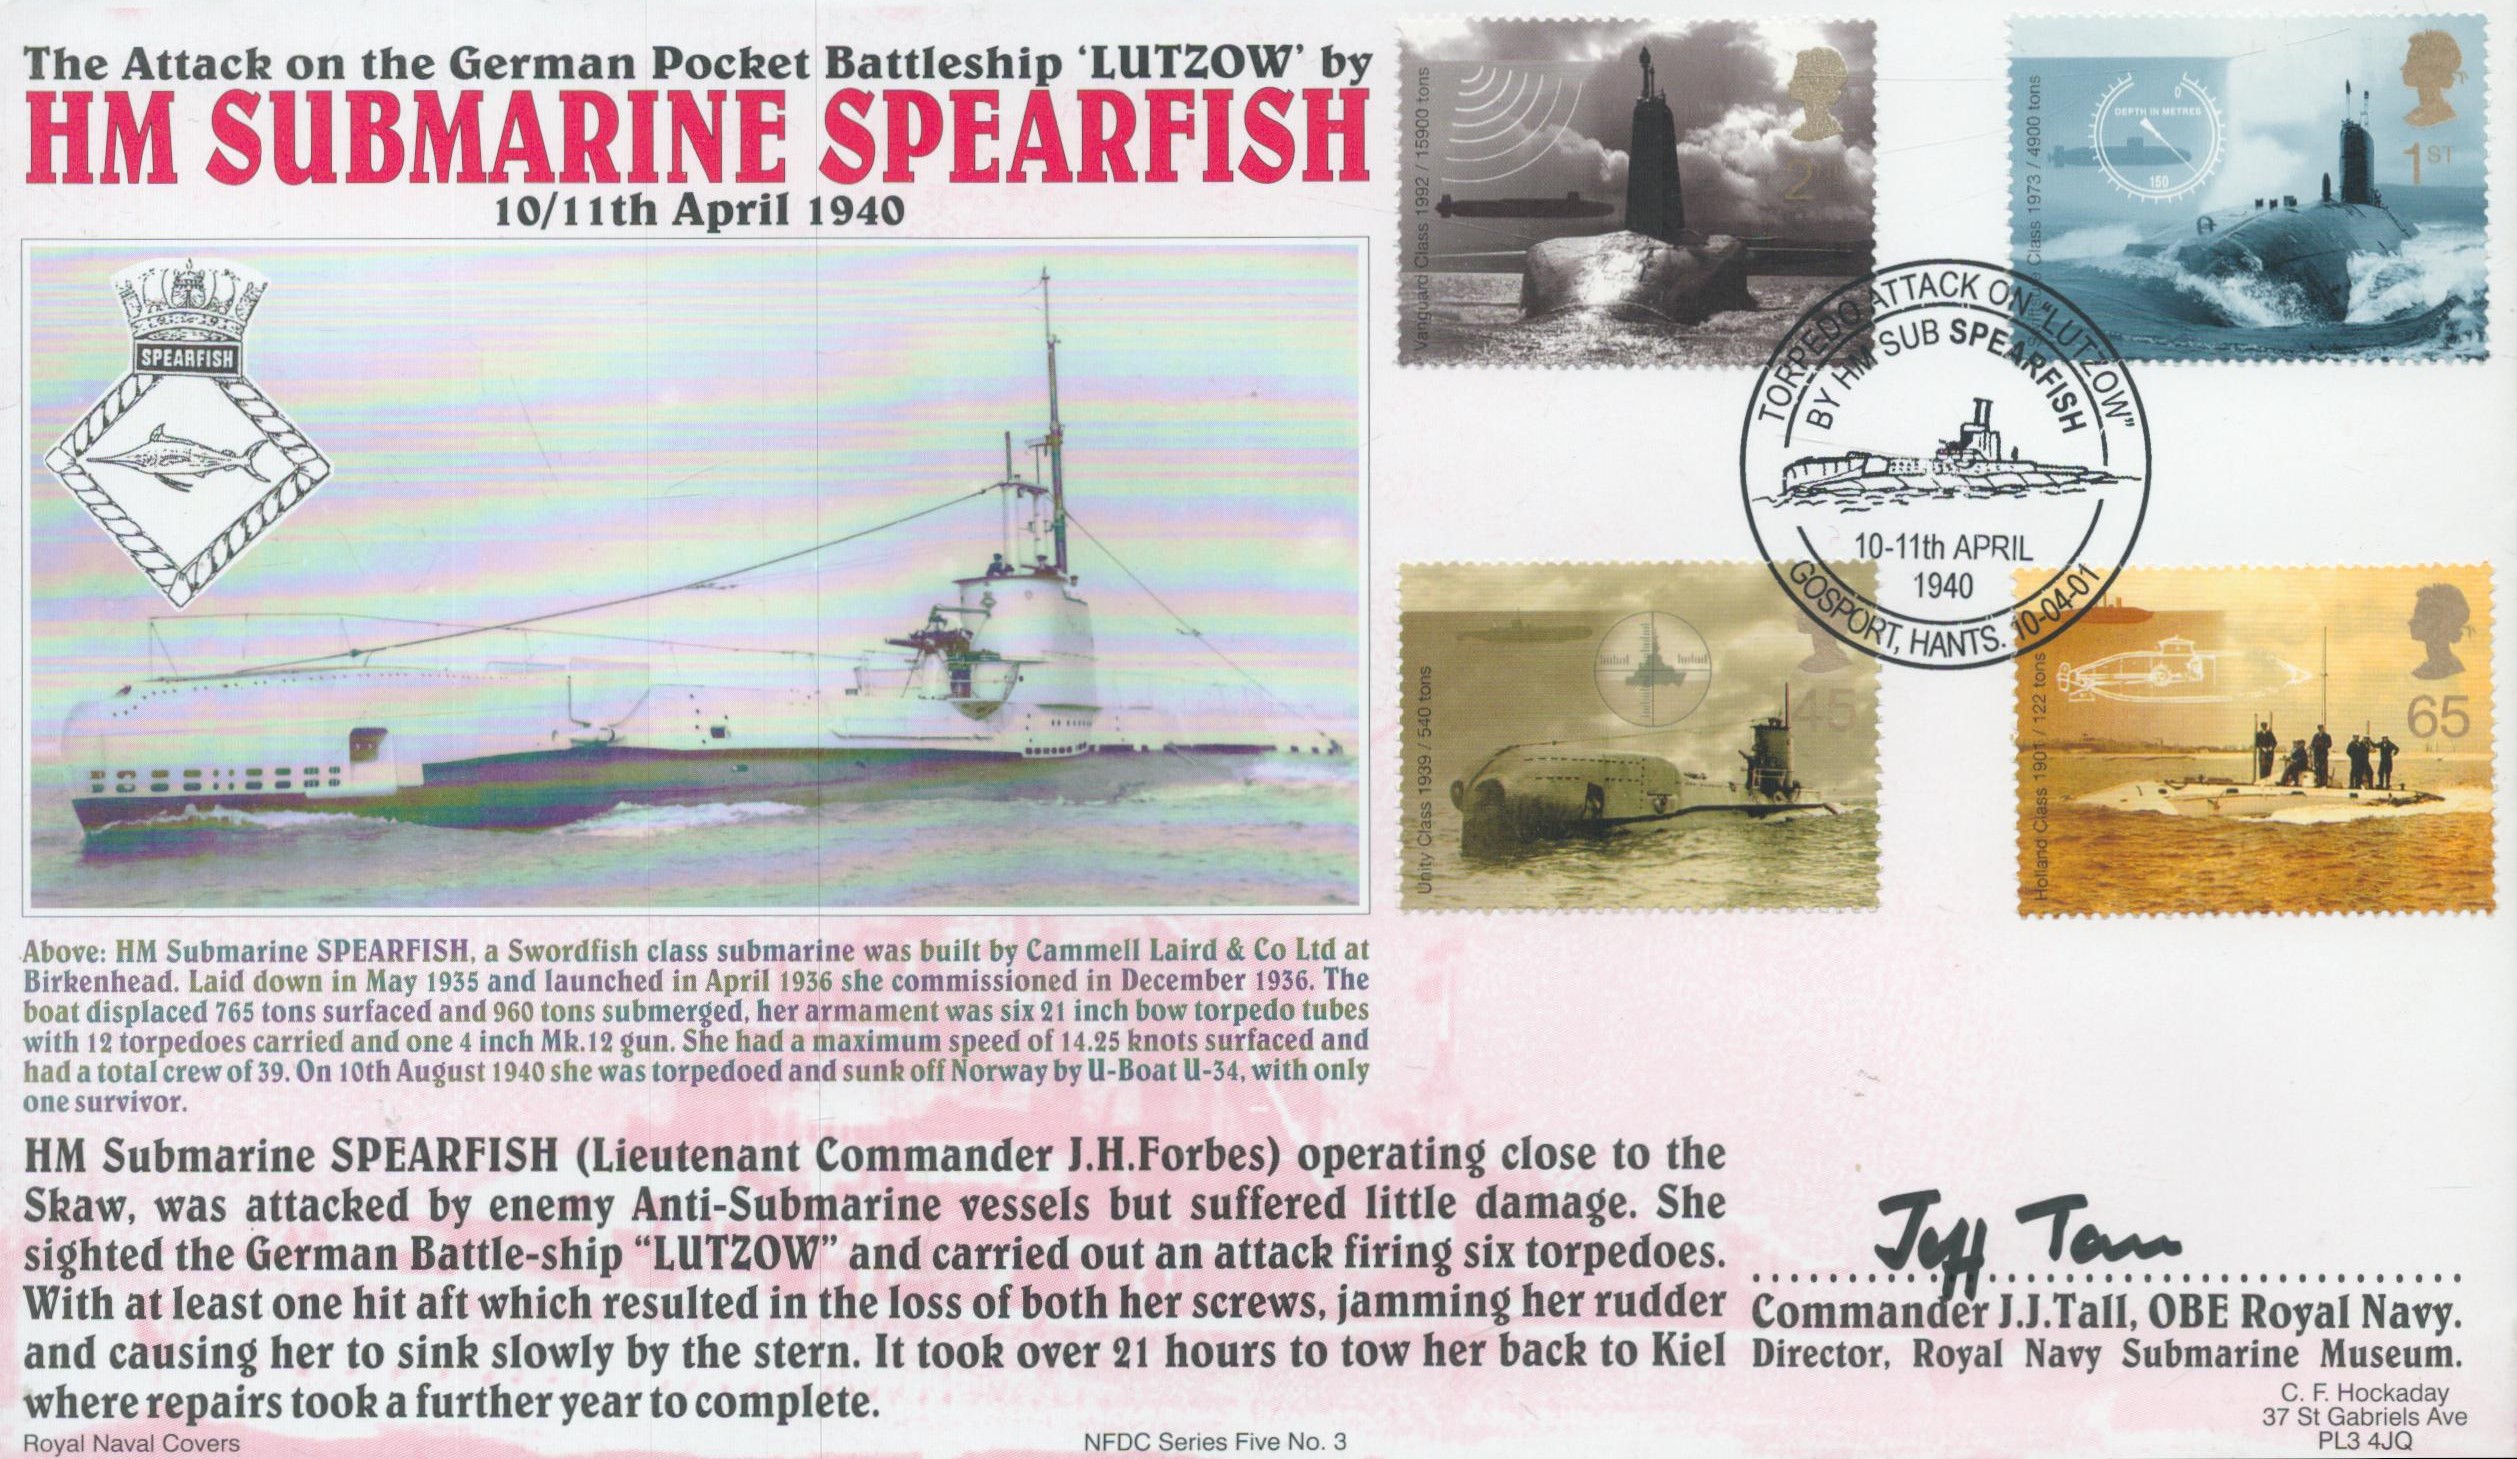 Cdre Jeff Tall OBE signed 2001 rare official Navy Submarine FDC with HMS Spearfish Postmark, cat £